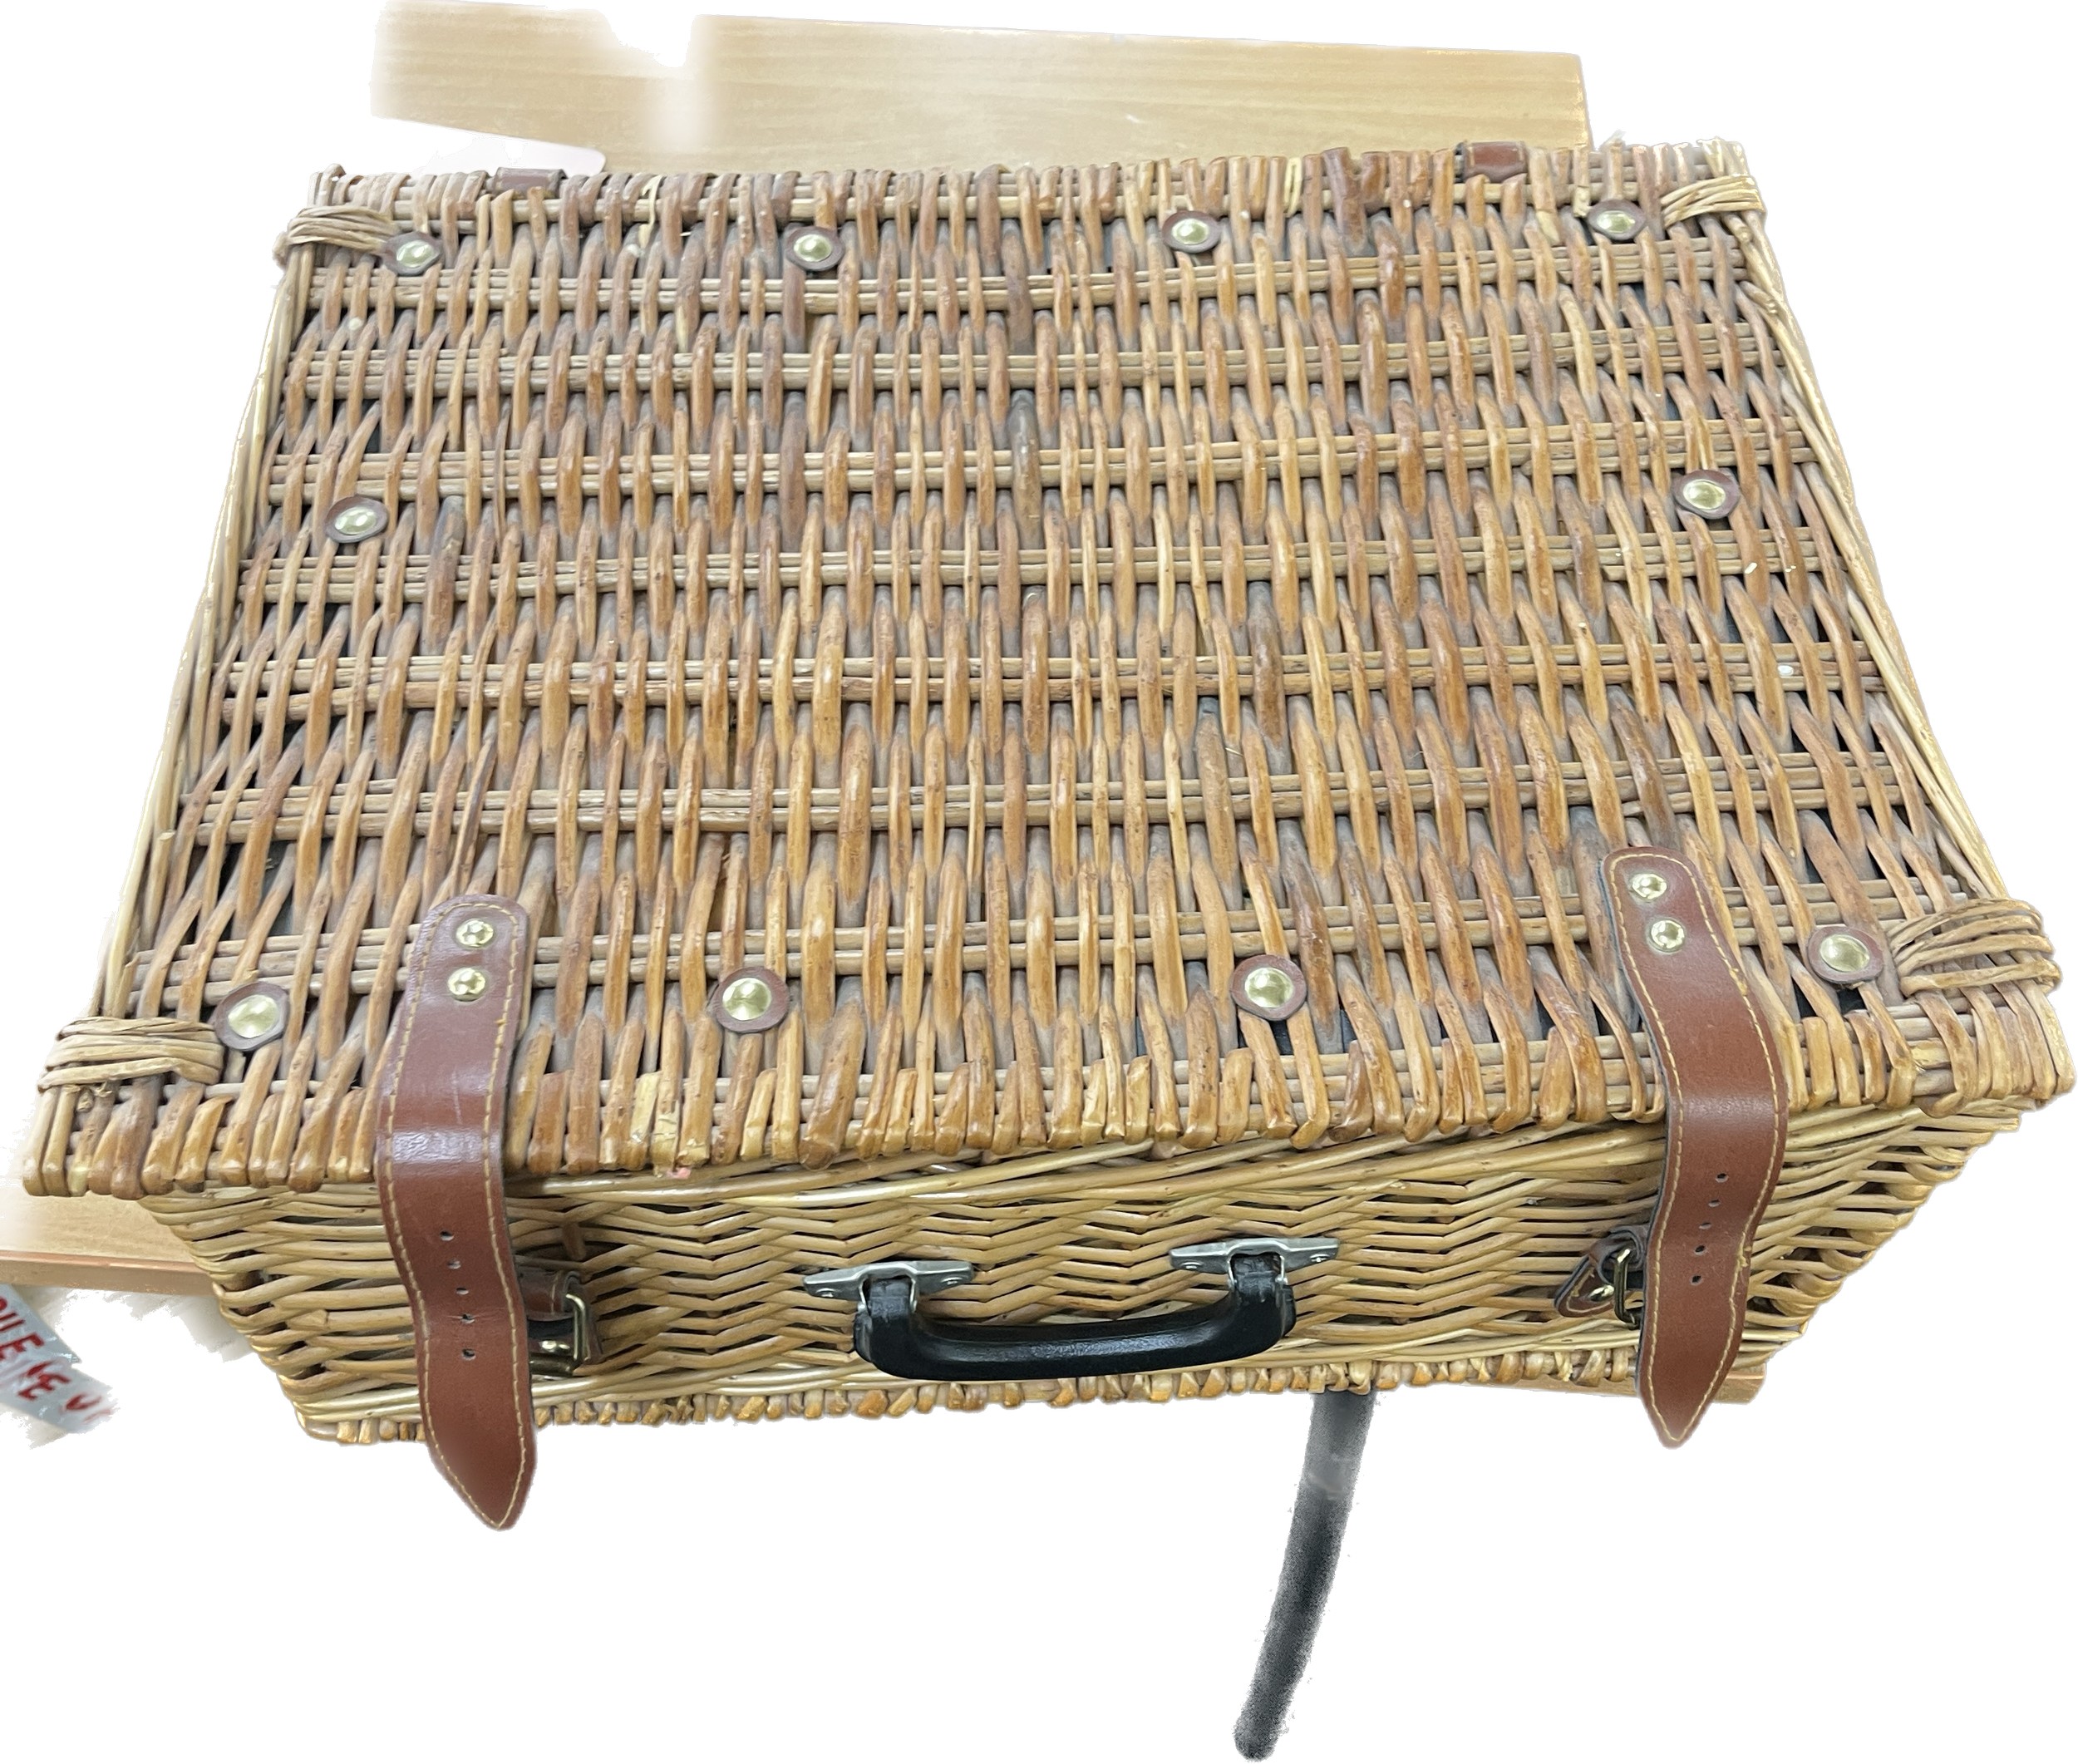 Wicker picnic baskets with contents - Image 2 of 2